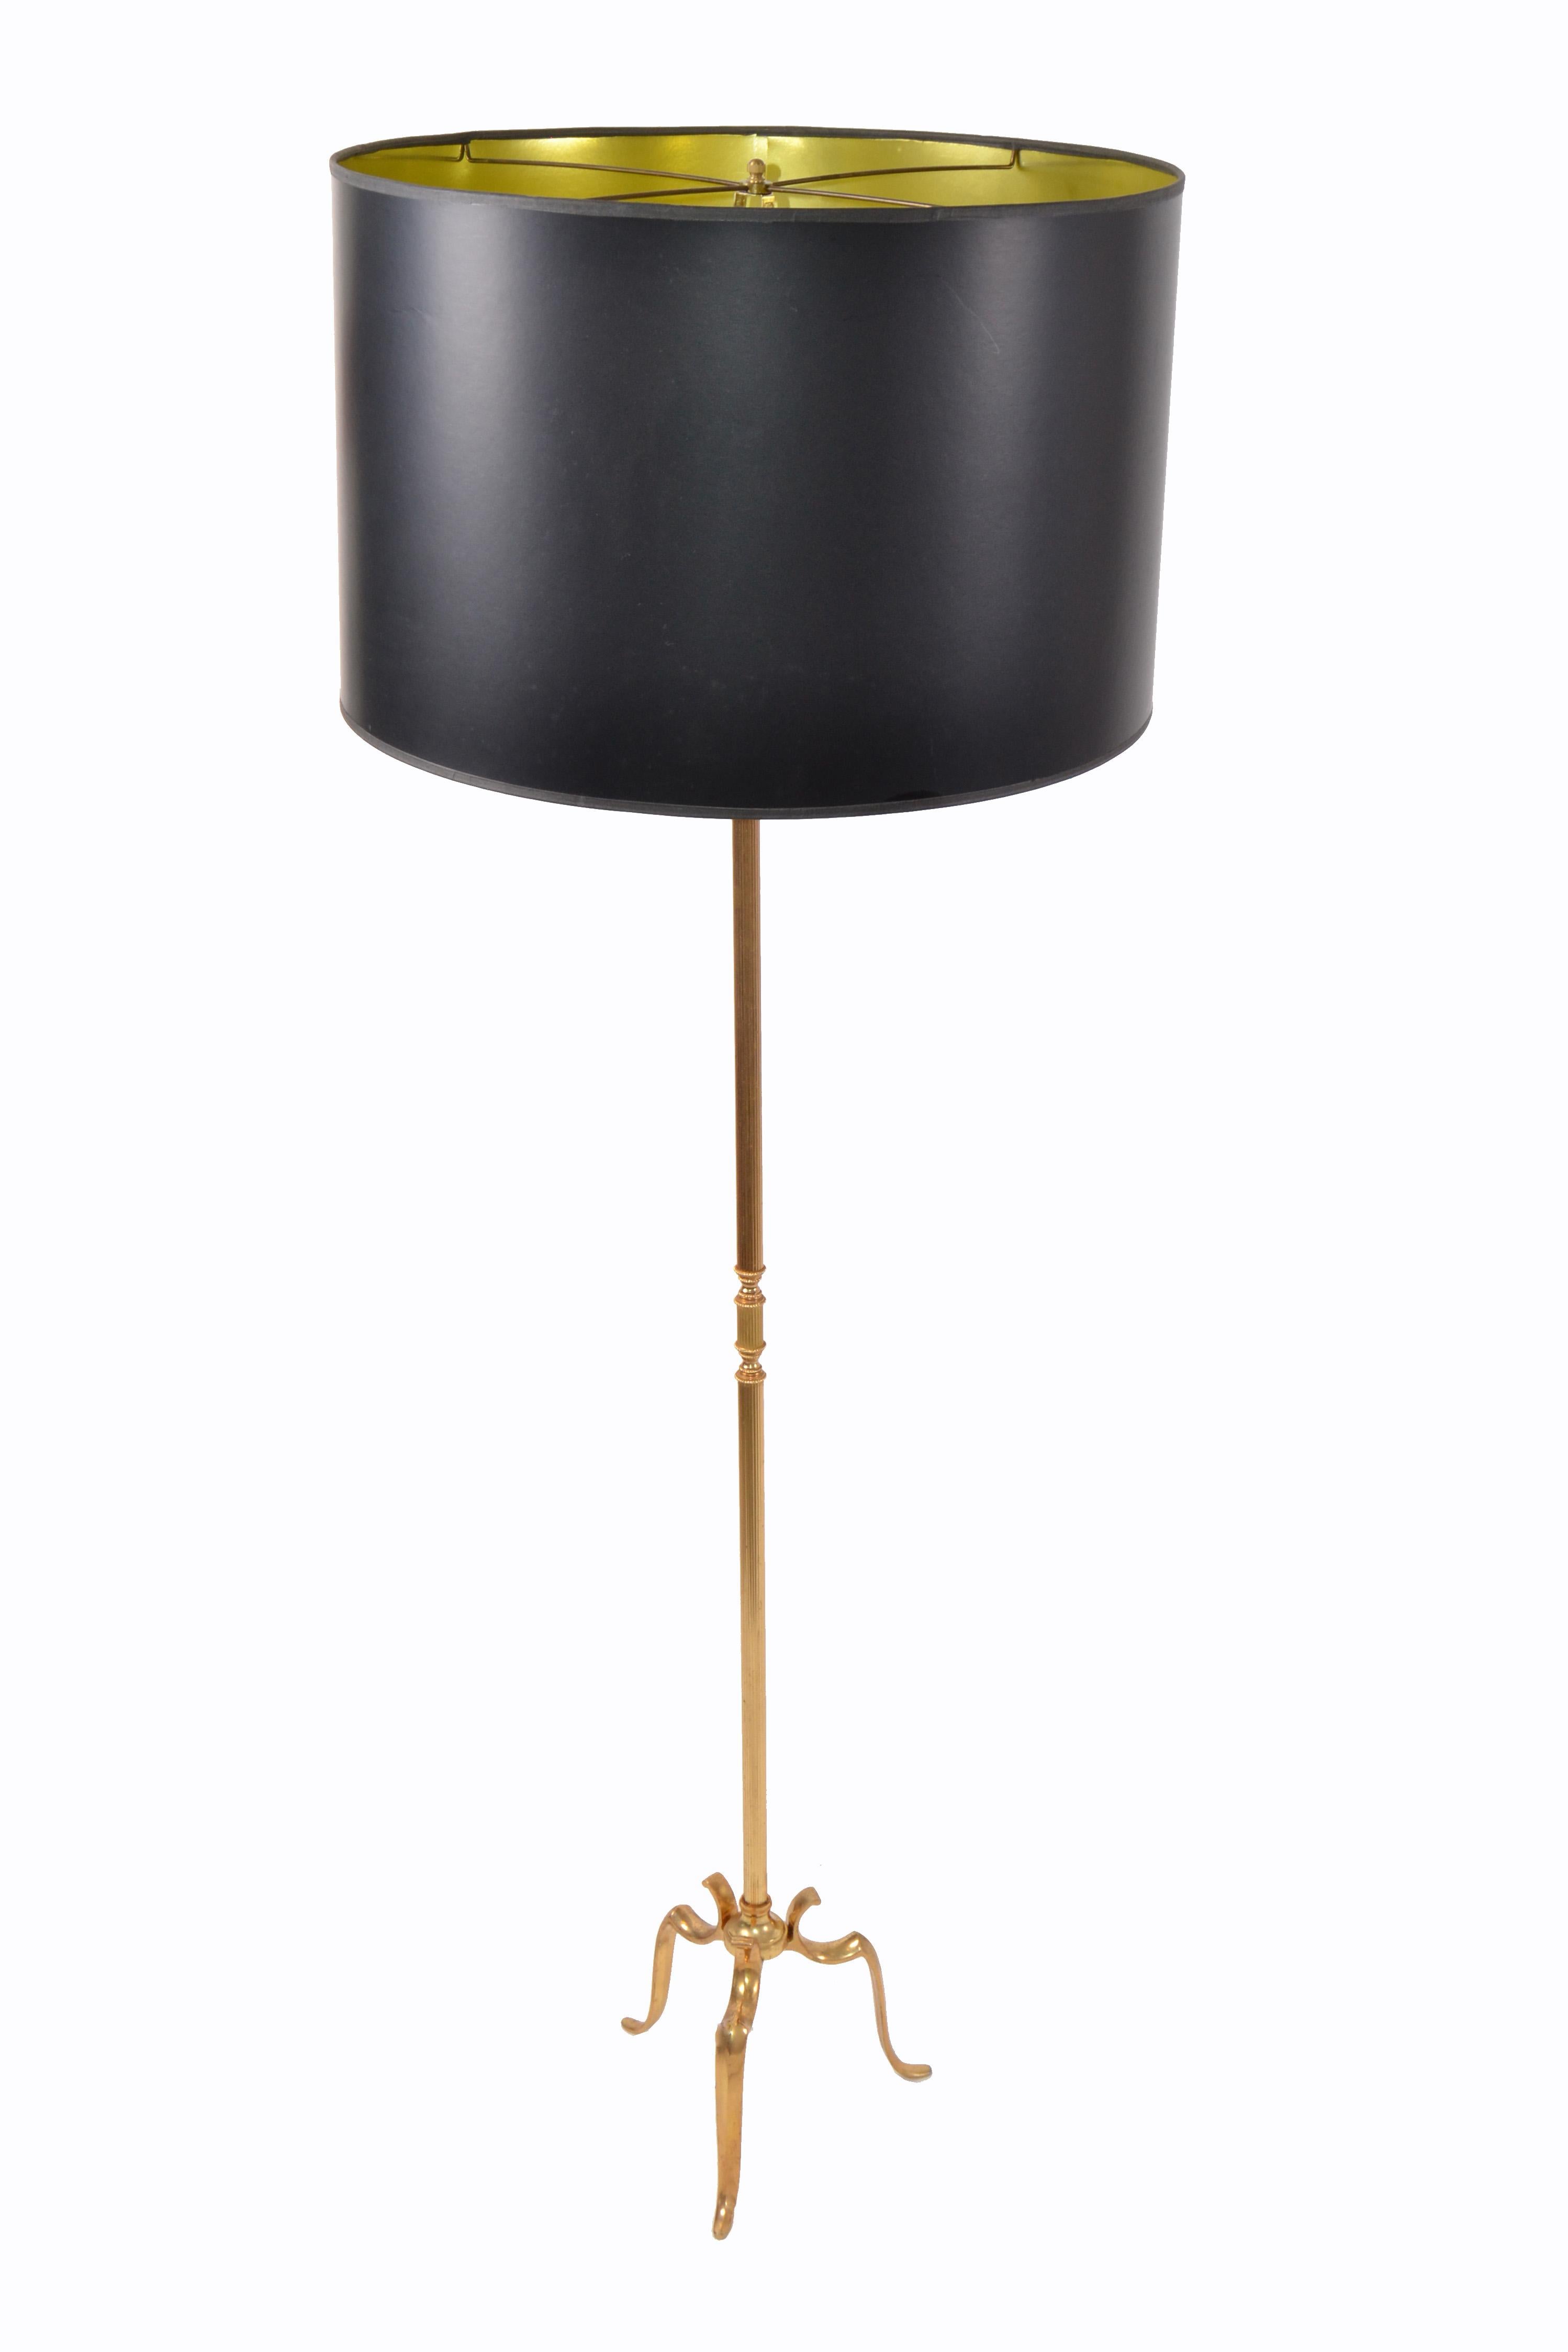 Splendid neoclassical bronze floor lamp by Maison Baguès, France.
Tripod base: 11 inches
Wired for US and in working condition.
Shade measures:
Diameter 22 inches, height 14 inches.